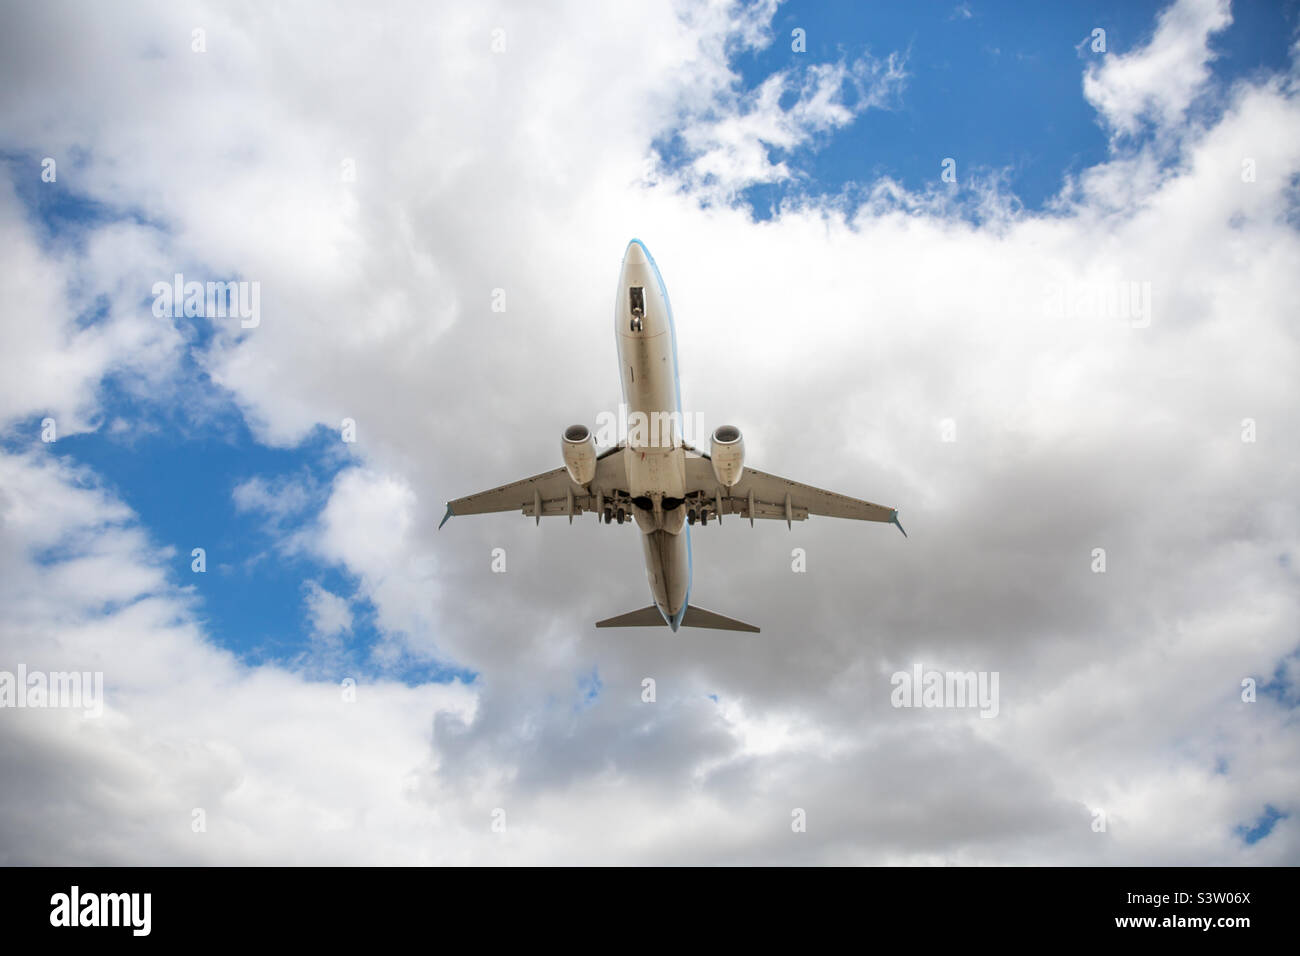 Directly underneath a low flying passenger plane taking off or landing with clouds behind and copy space Stock Photo